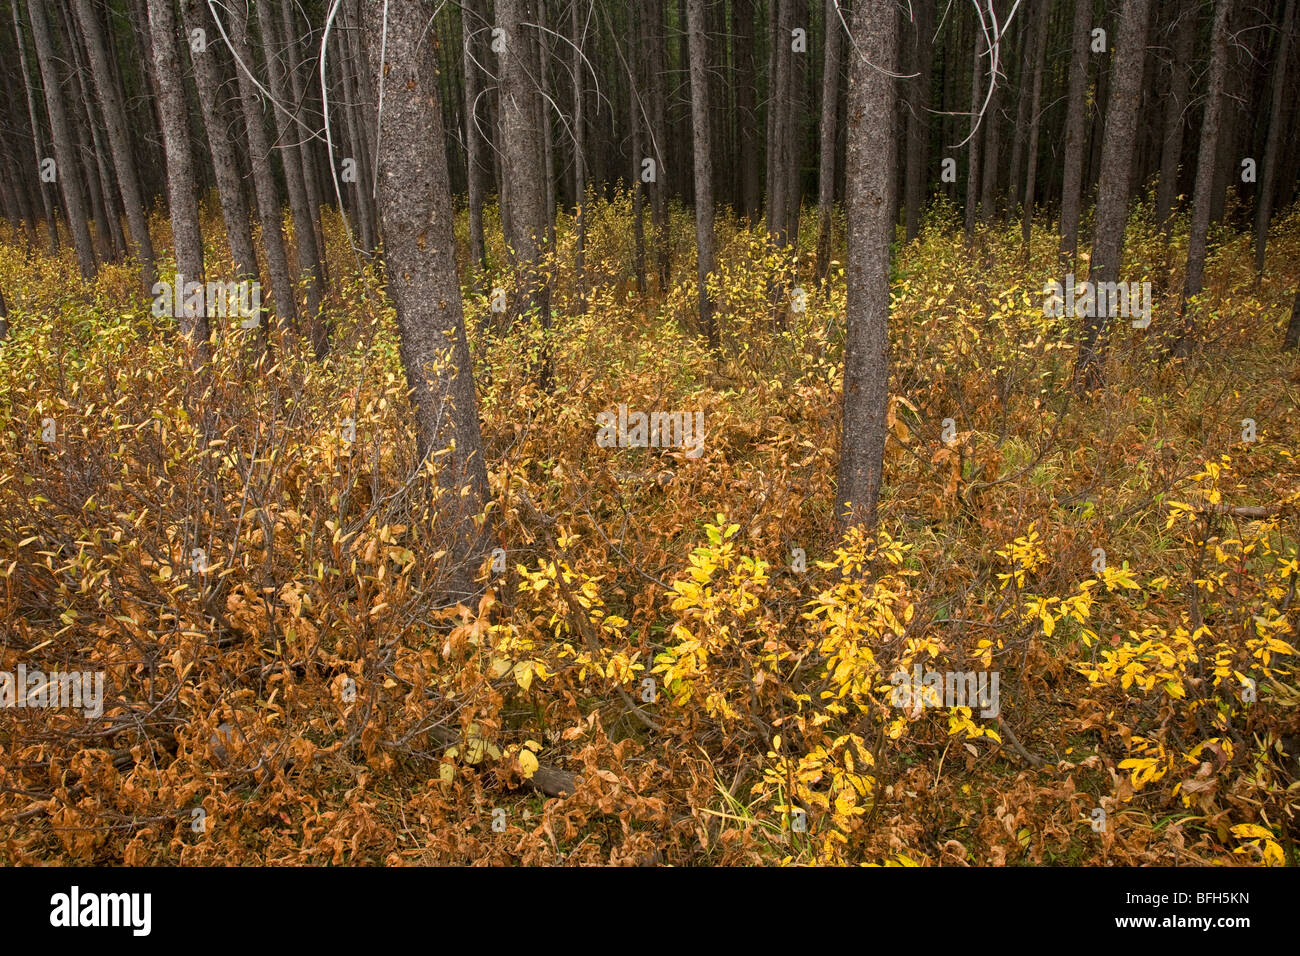 Fall colours in the underbrush of a pine forest in Kananasis Country, Alberta, Canada Stock Photo